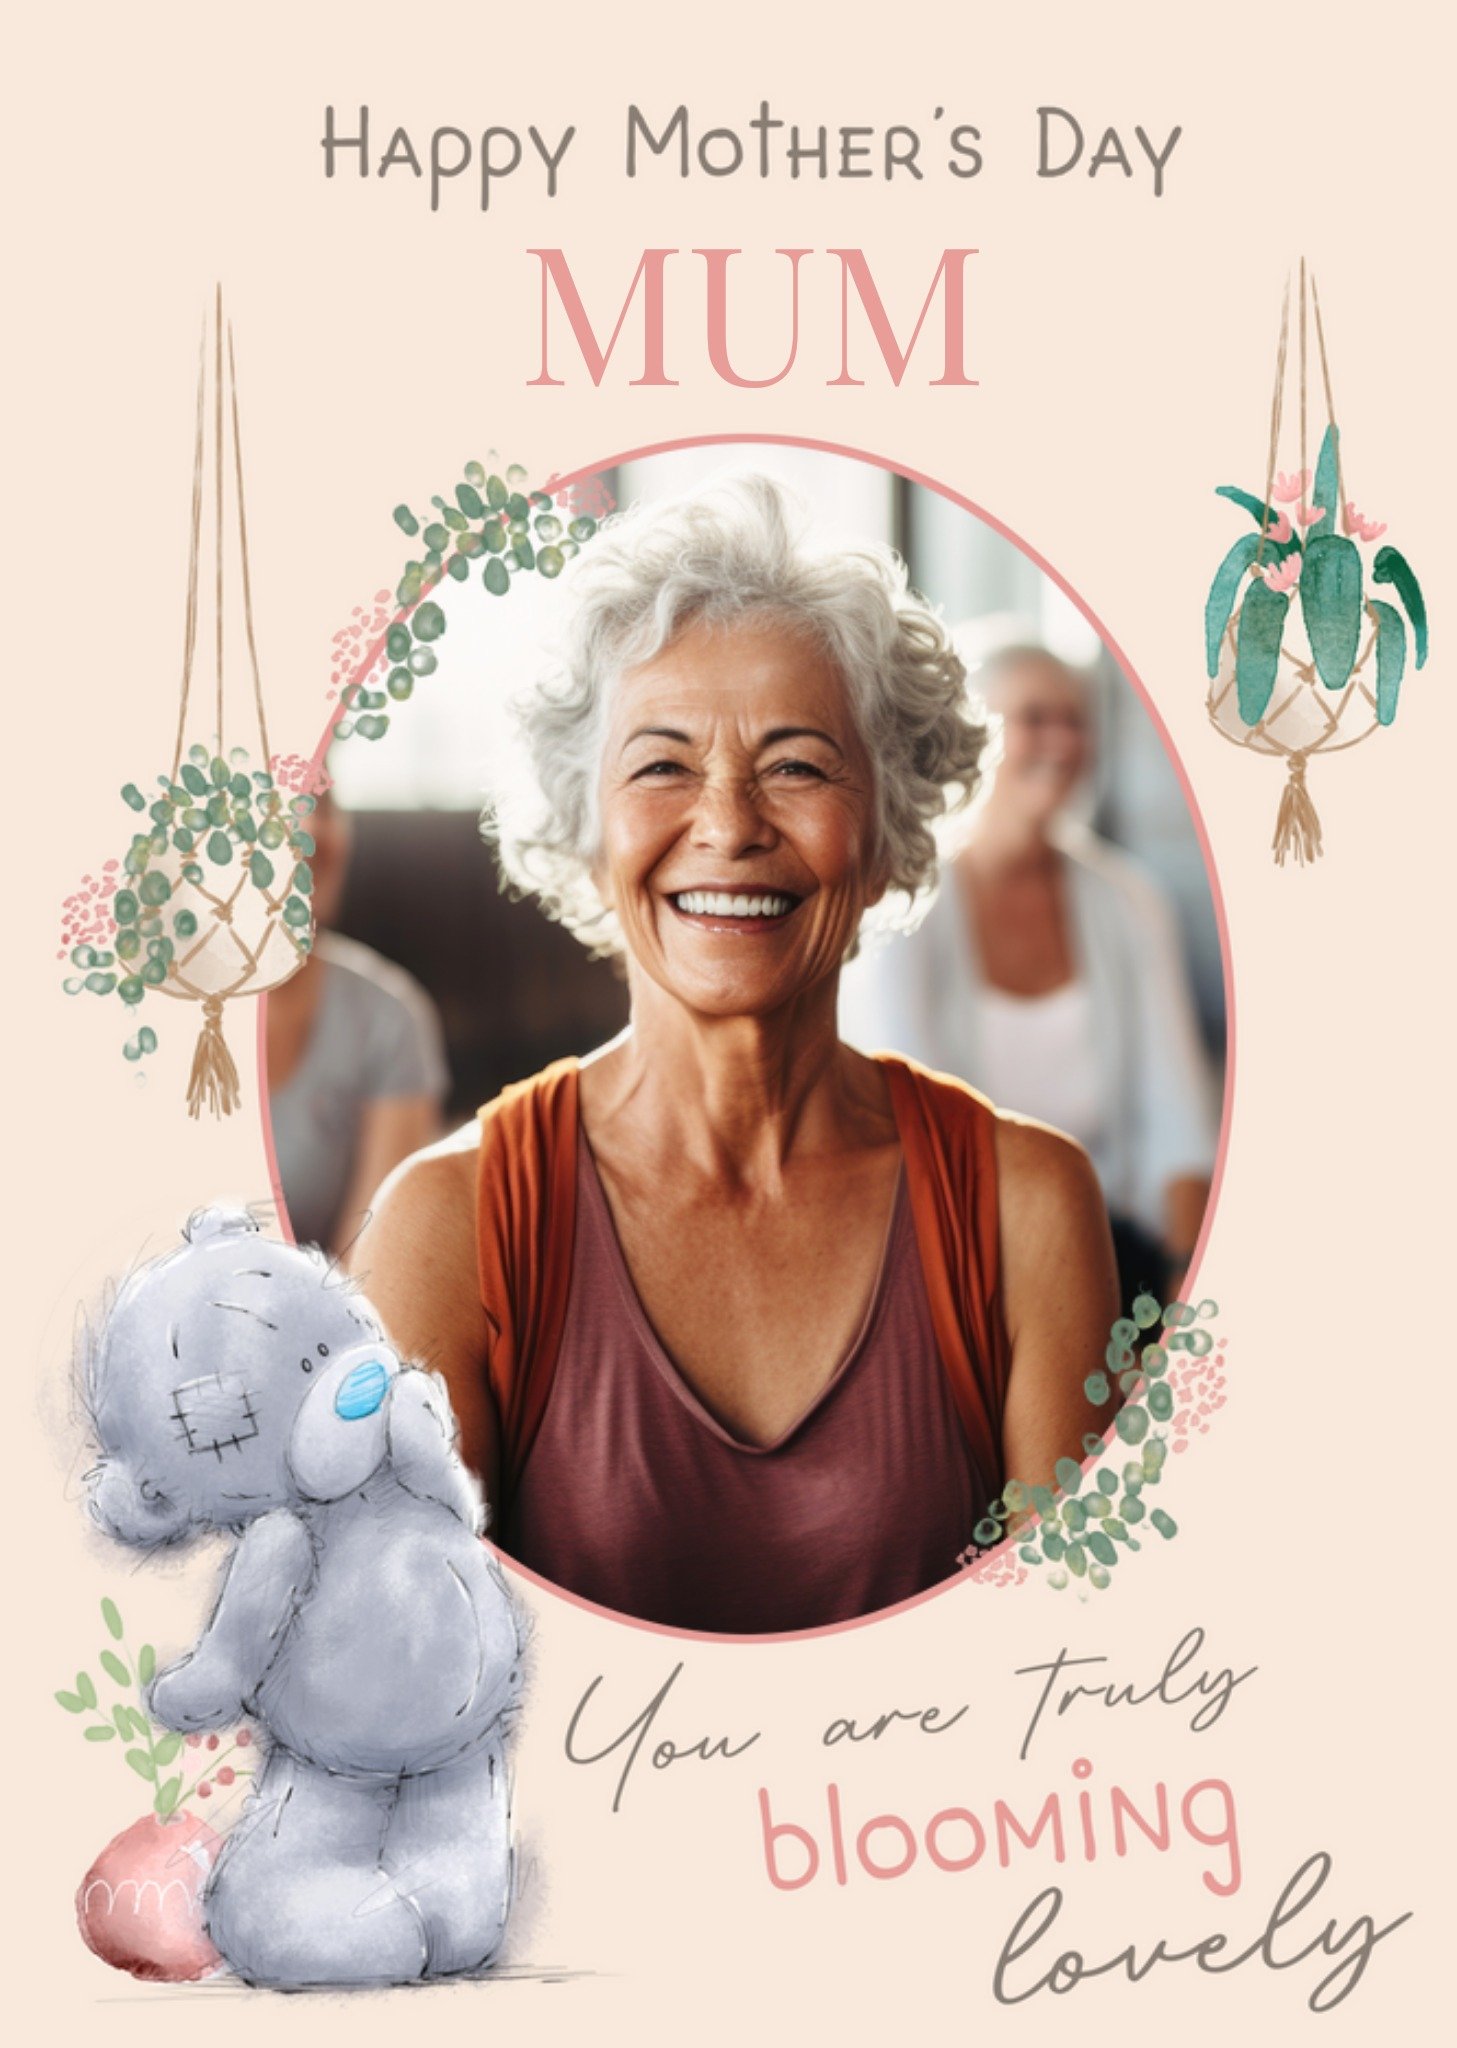 Me To You Tatty Teddy Truly Blooming Photo Upload Mother's Day Card Ecard